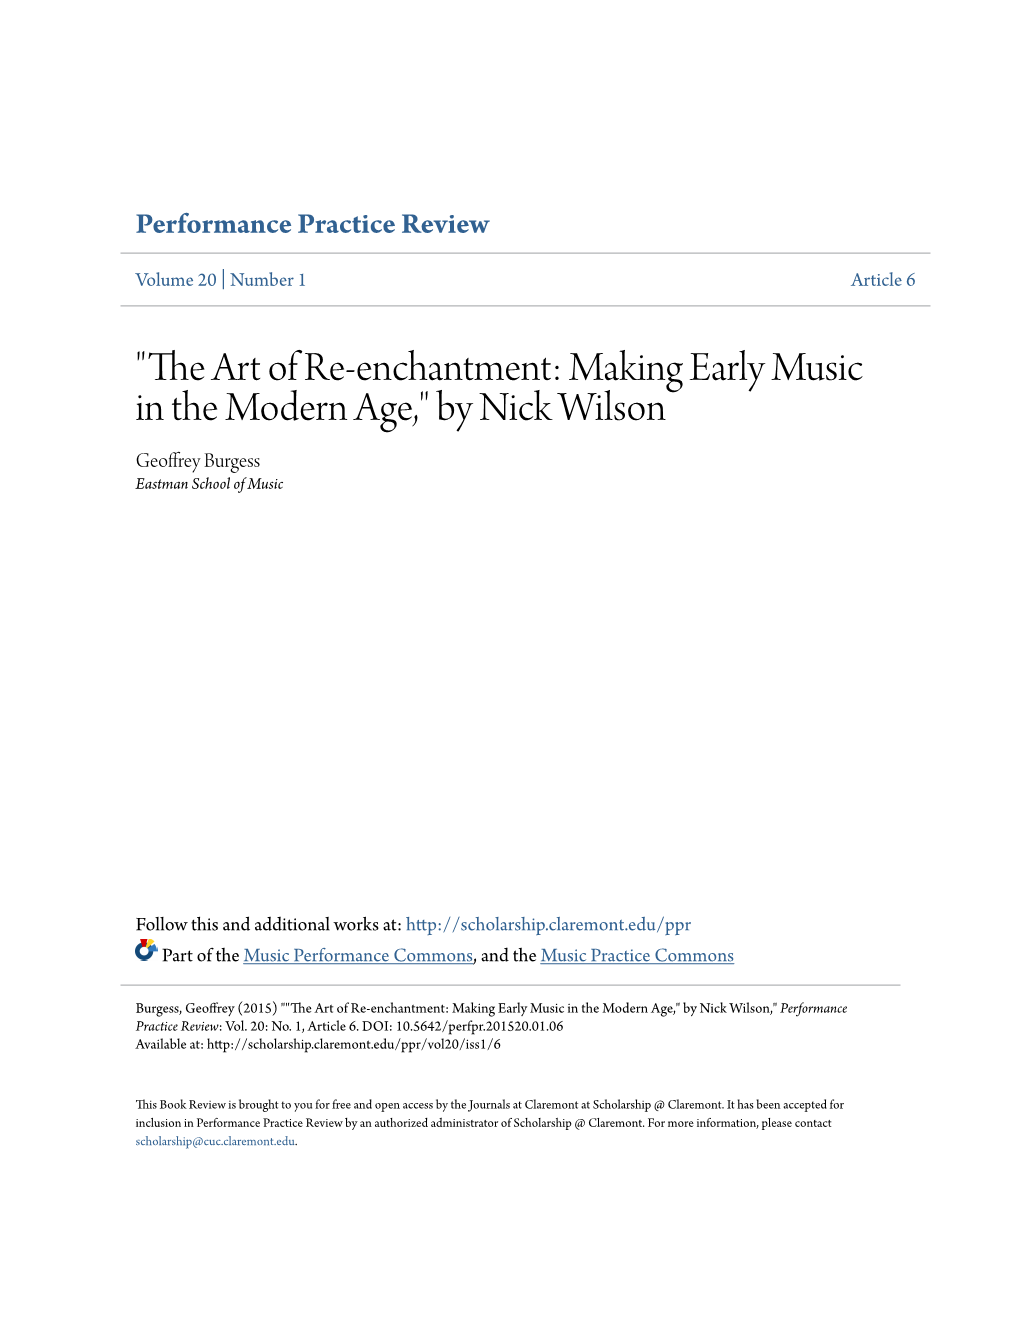 "The Art of Re-Enchantment: Making Early Music in the Modern Age," by Nick Wilson Geoffrey Burgess Eastman School of Music